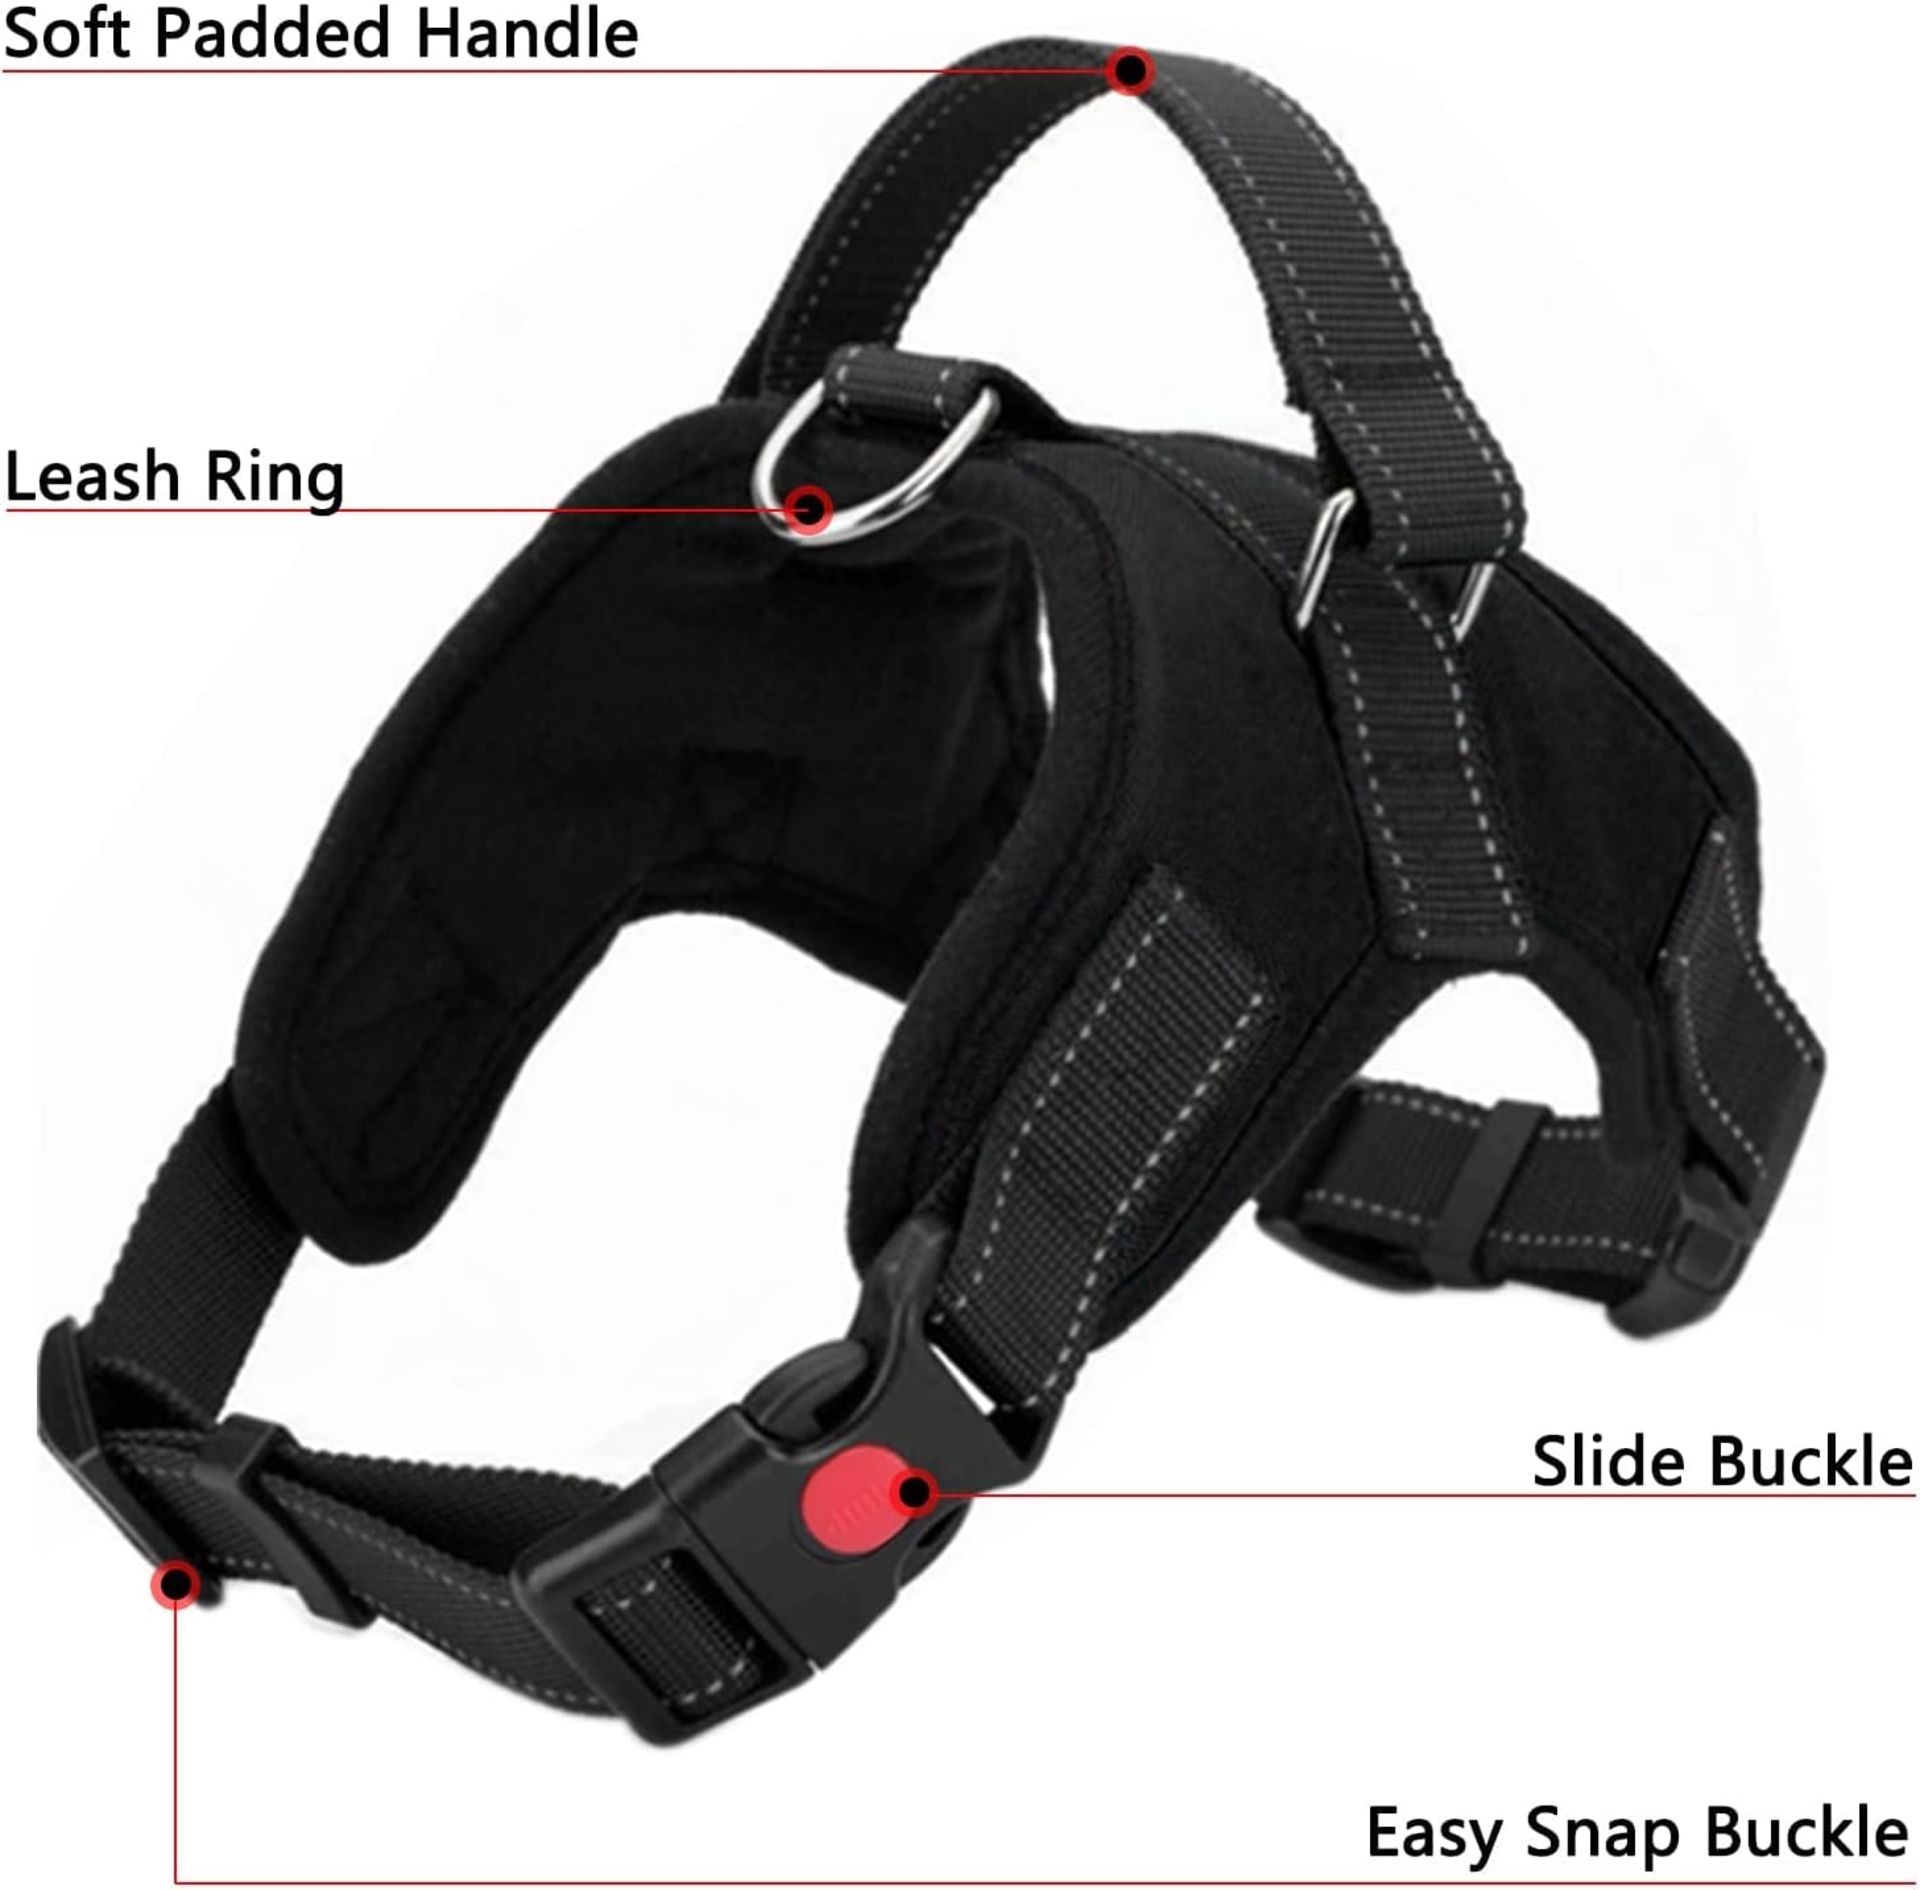 300 X JOBLOT DOG HARNESSES STRONG MIXED SIZES AND COLORS - Image 4 of 7